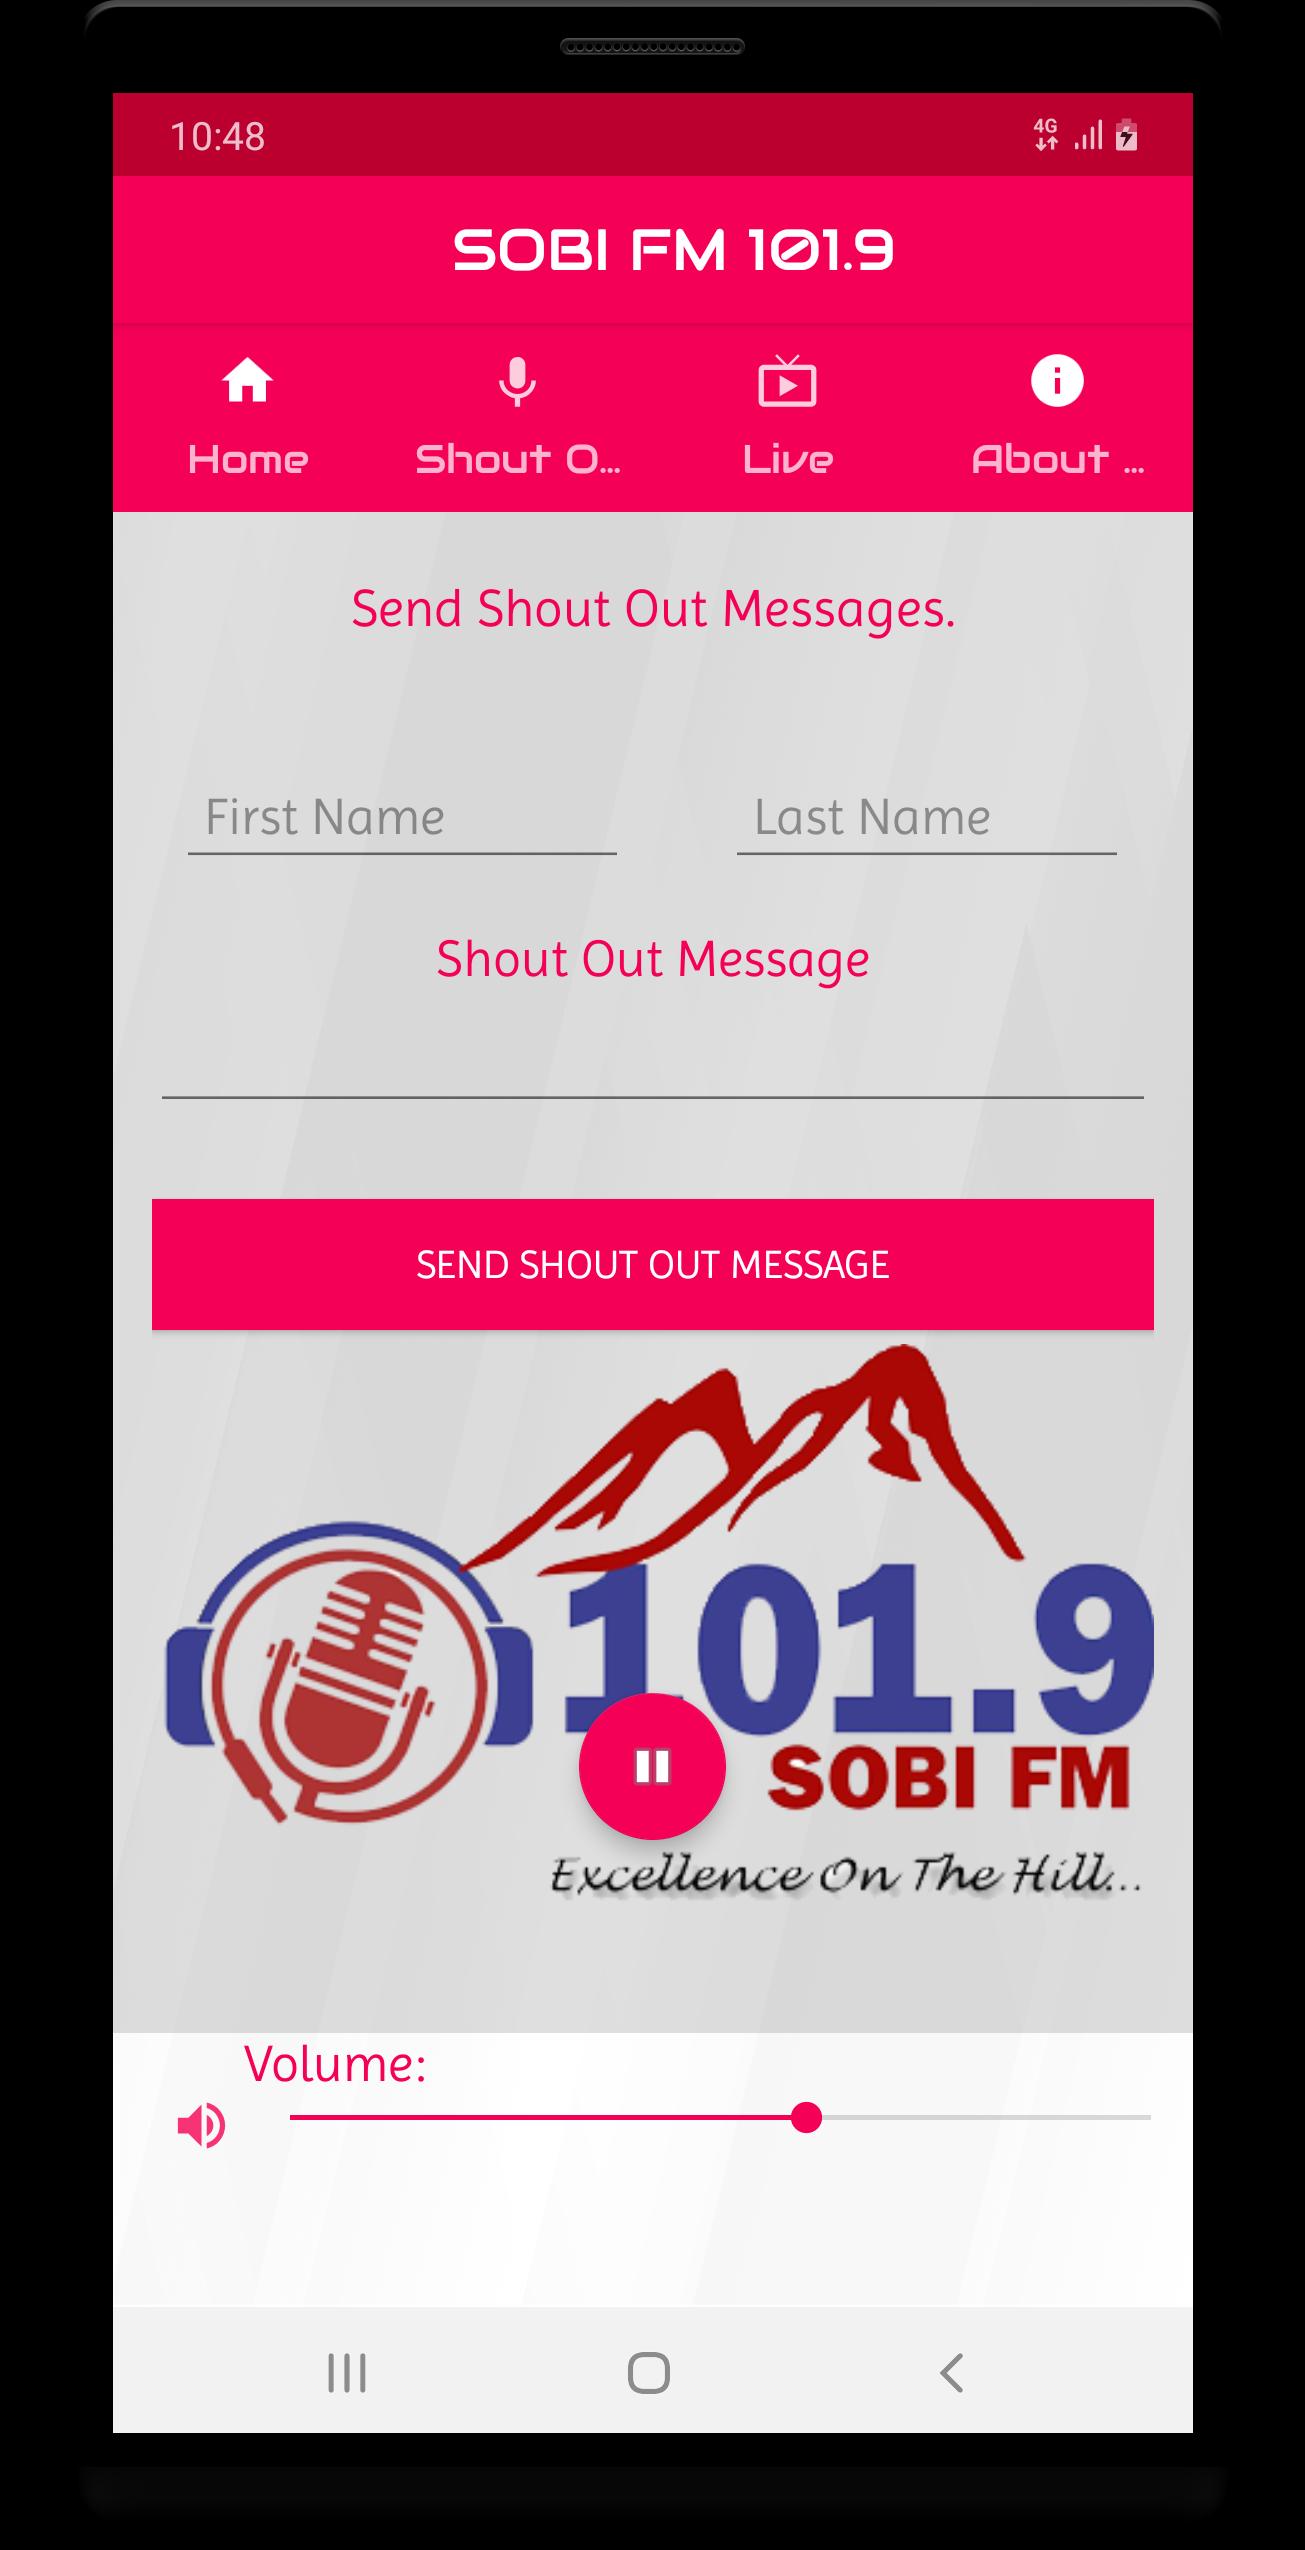 Sobi FM 101.9 Official Radio App for Android - APK Download